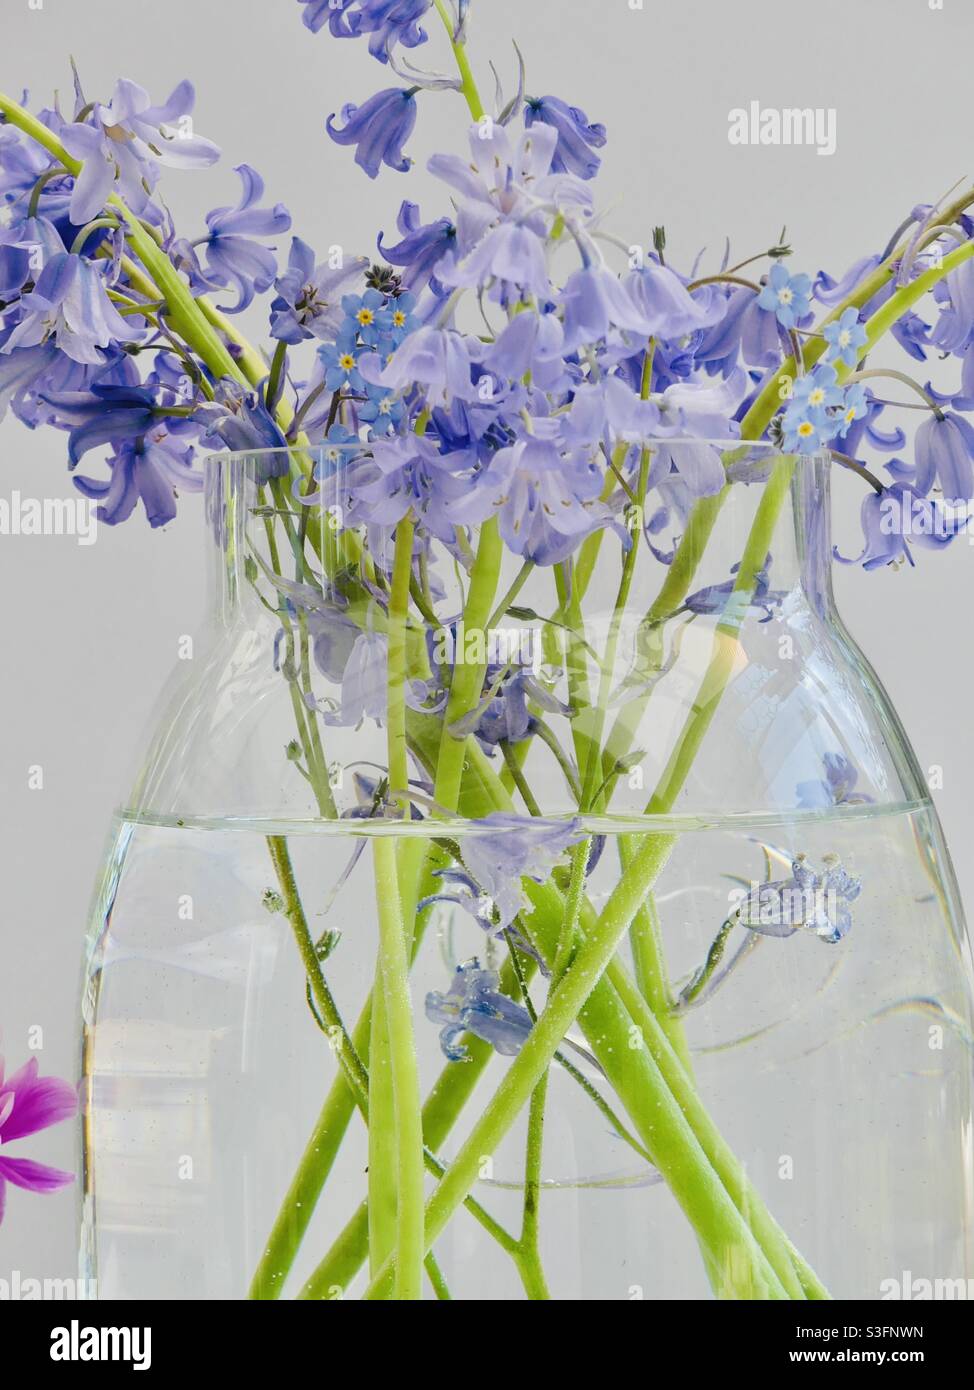 Bluebells in a glass vase Stock Photo